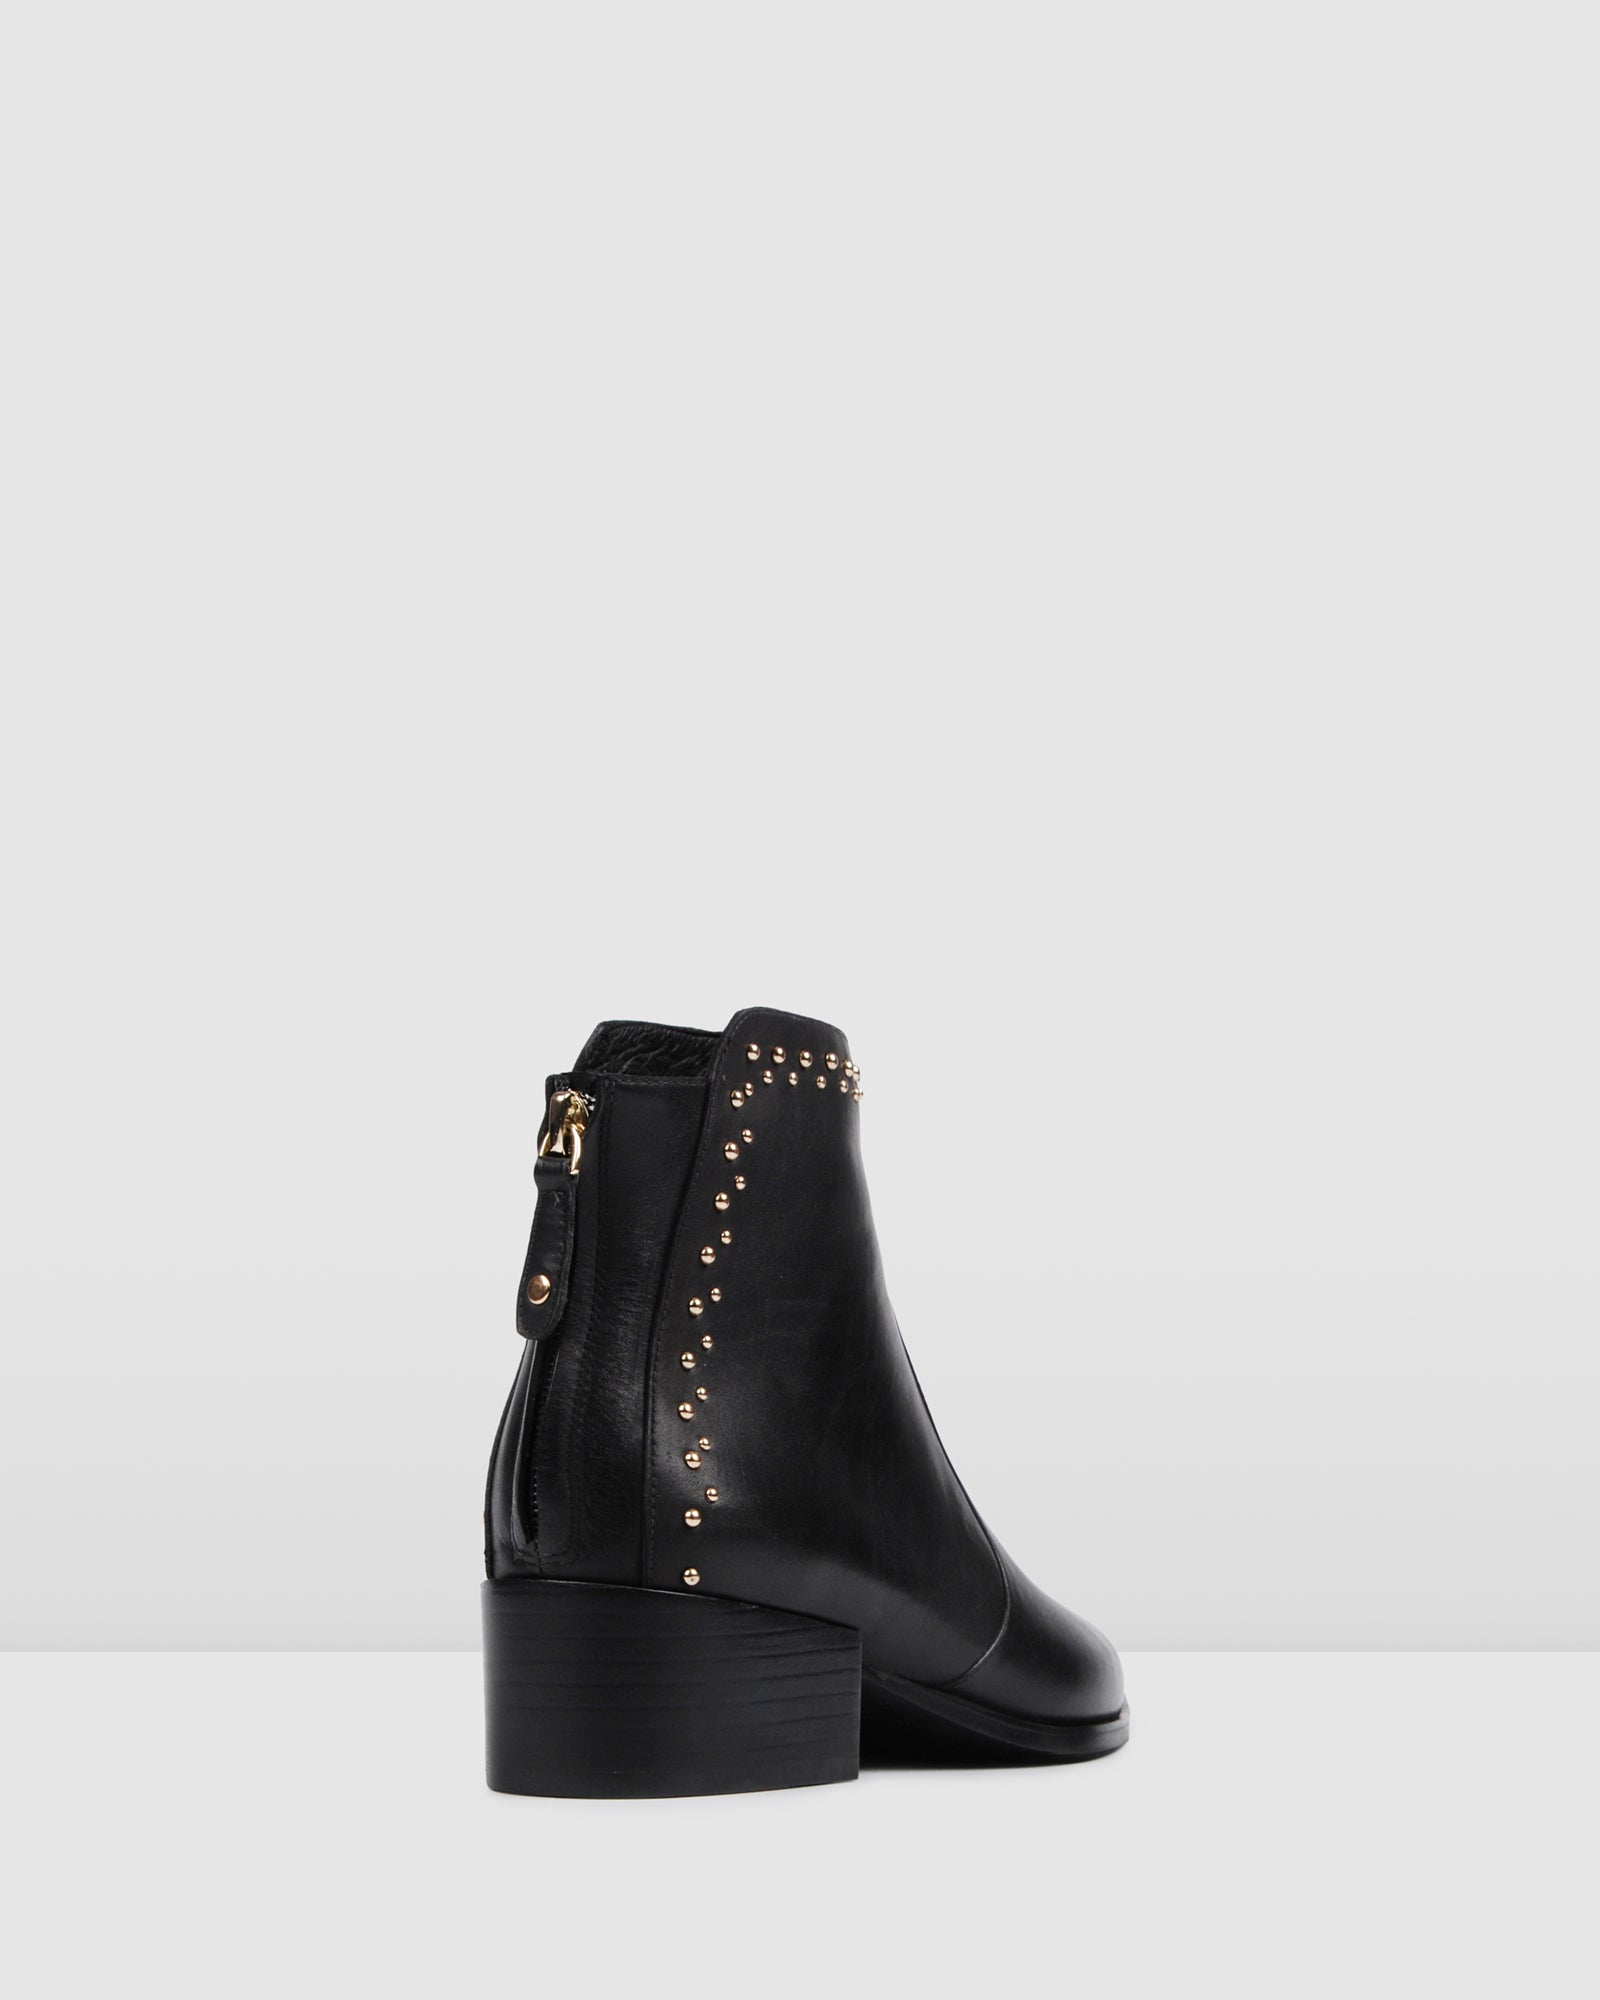 black leather ankle boots flat heel